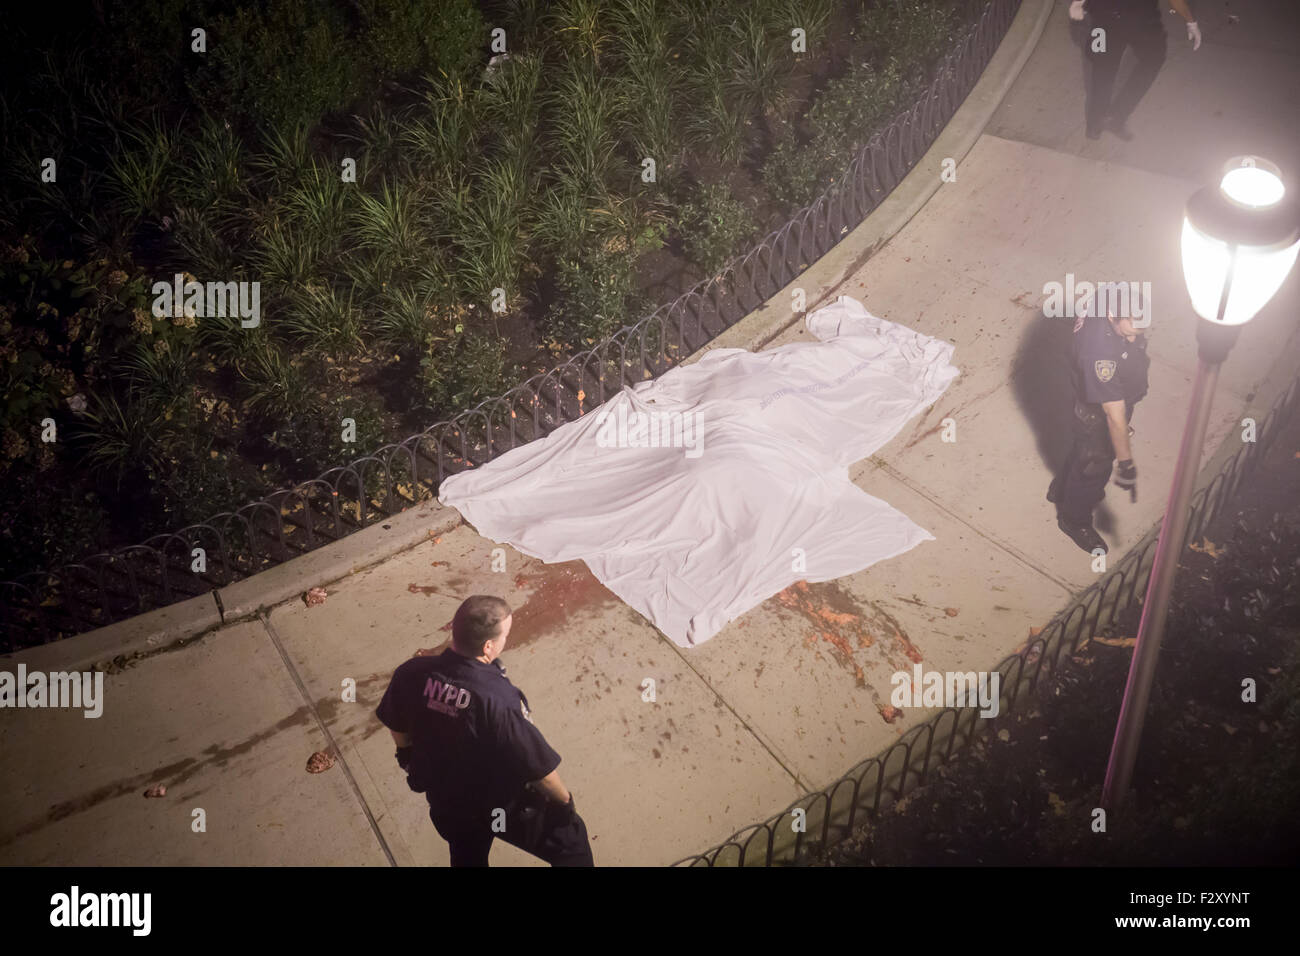 Graphic material: NYPD officers investigate the aftermath of a suicide by jumping off a building in New York on Saturday, September 19, 2015. (© Richard B. Levine) Stock Photo